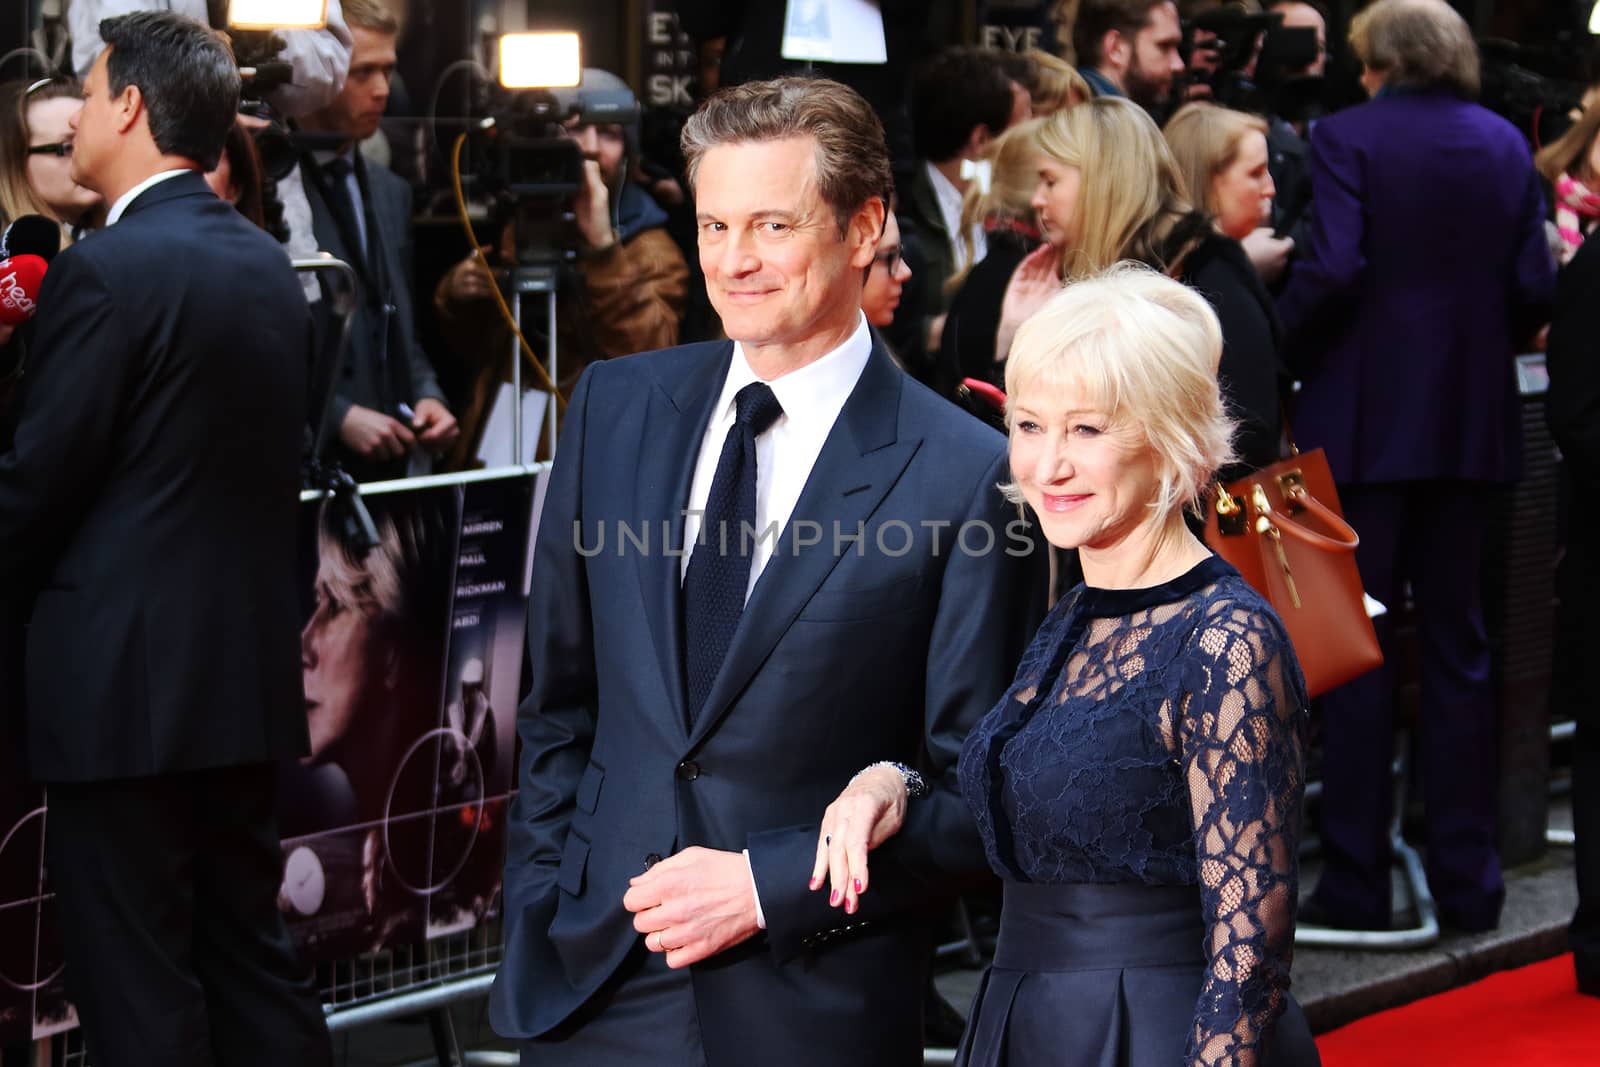 UK, London: Colin Firth and Helen Mirren pose on the red carpet on April 11, 2016 before the premiere of Eye in the Sky at Curzon Mayfair Cinema in London.